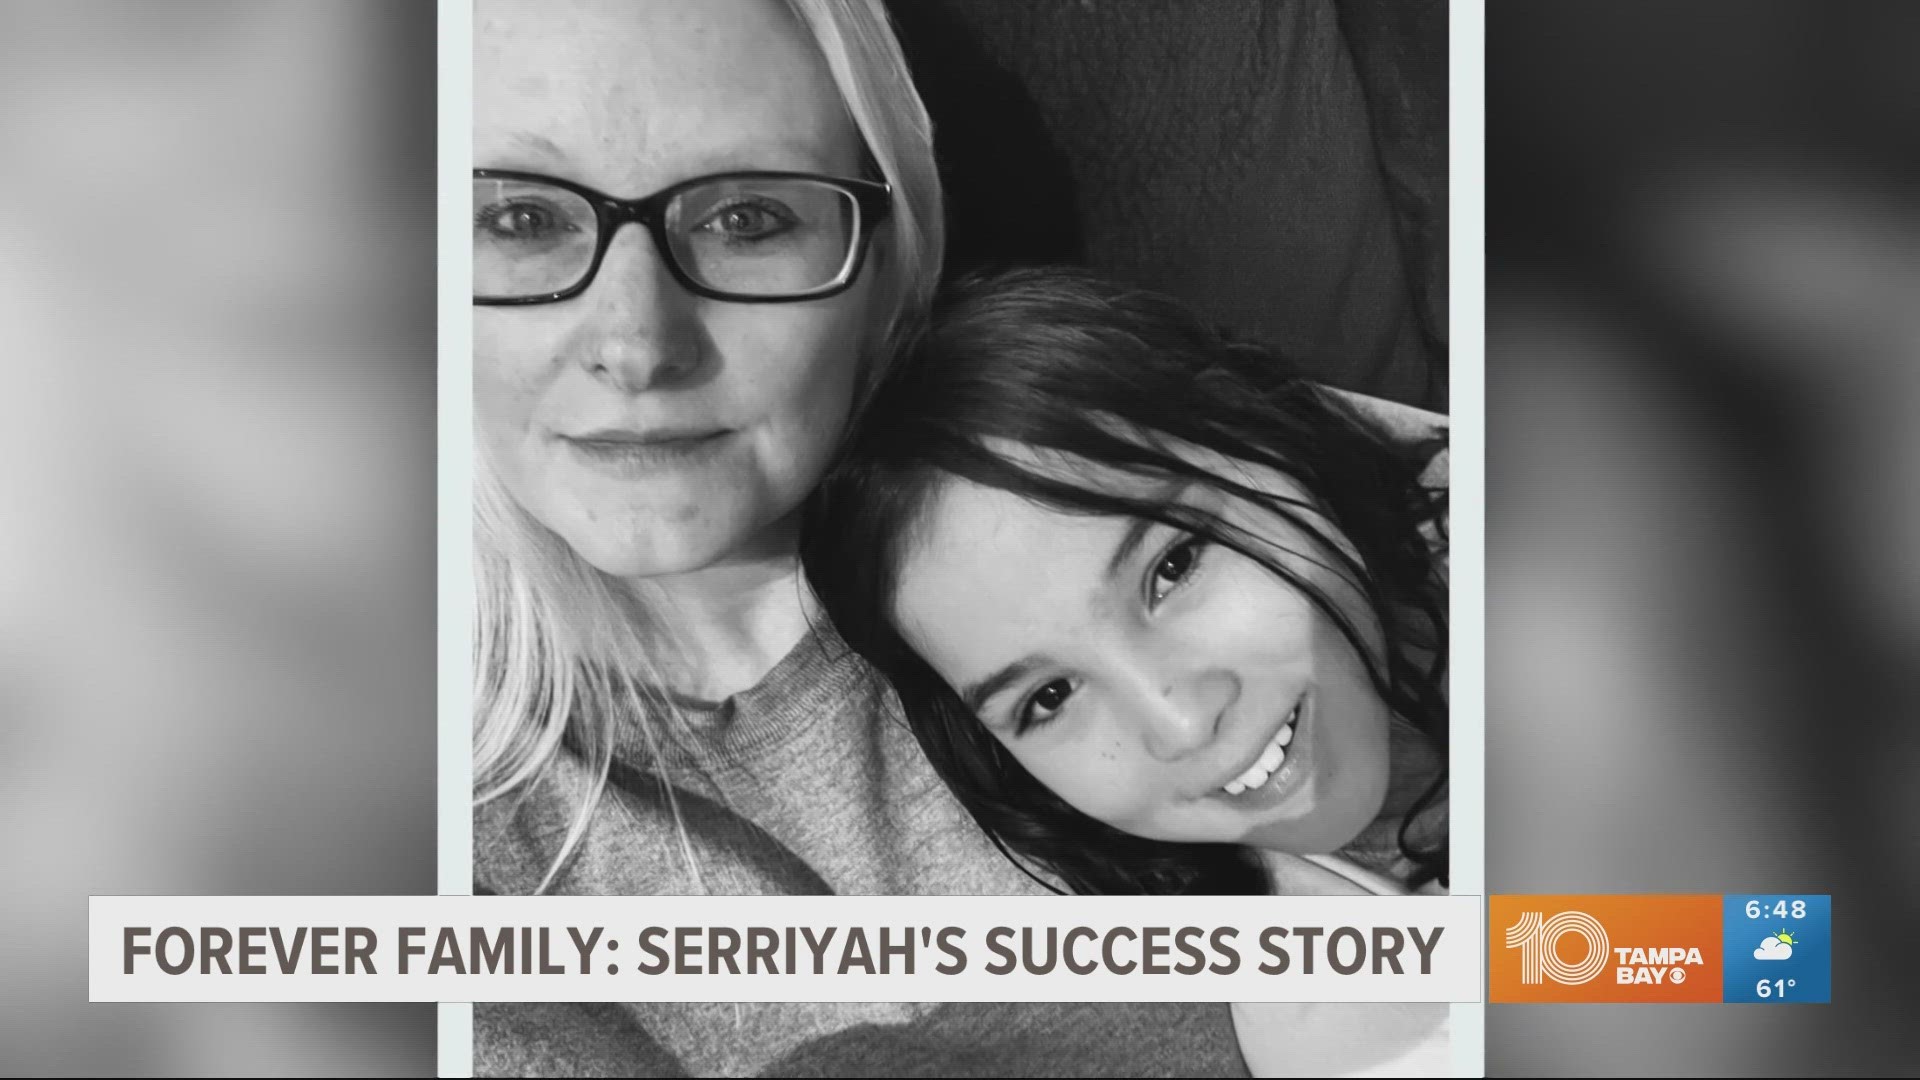 Serriyah now has a loving mom, siblings and a grandmother who have taken her into their home and hearts. Adoption through foster care is free.